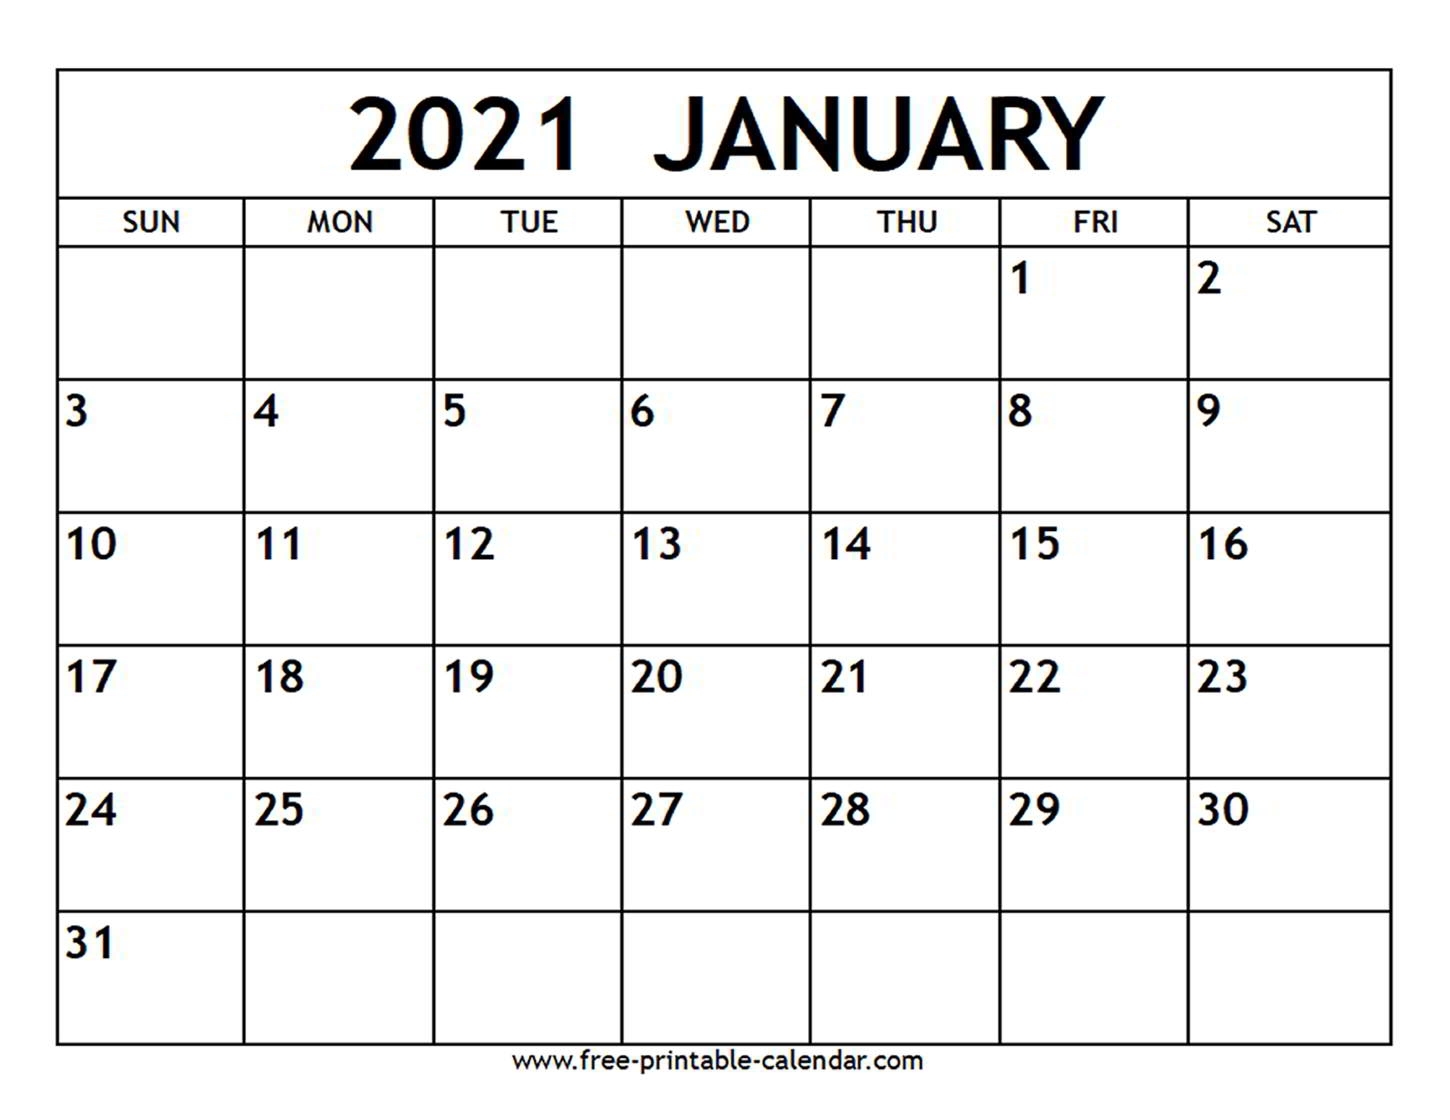 Pick 2021 Calendars To Print Without